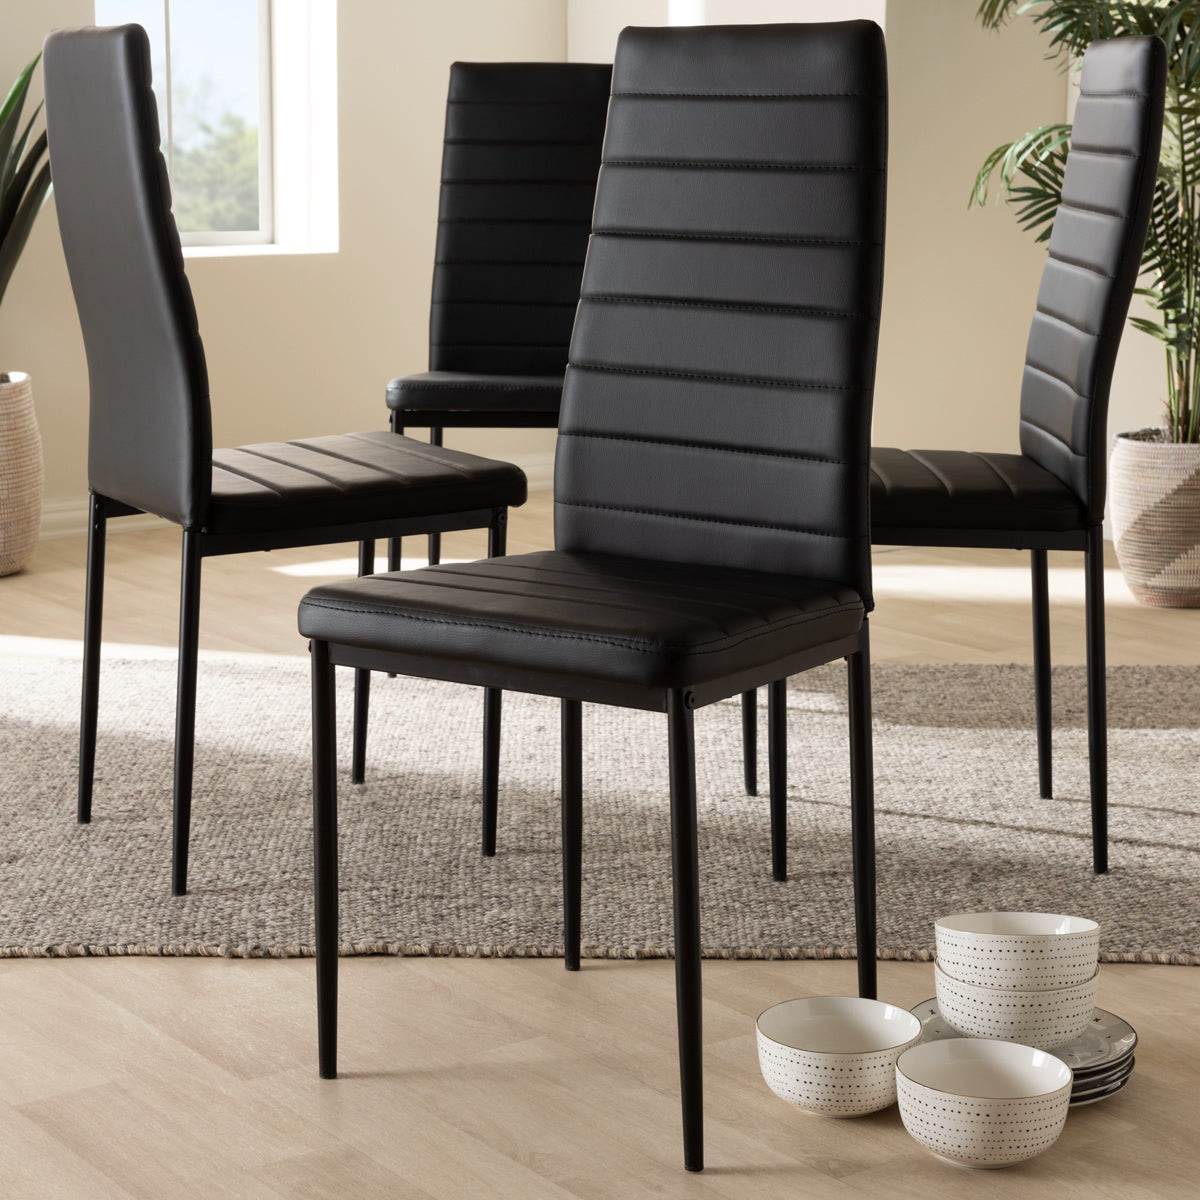 Baxton Studio Armand Modern and Contemporary Black Faux Leather Upholstered Dining Chair (Set of 4) Baxton Studio-dining chair-Minimal And Modern - 3